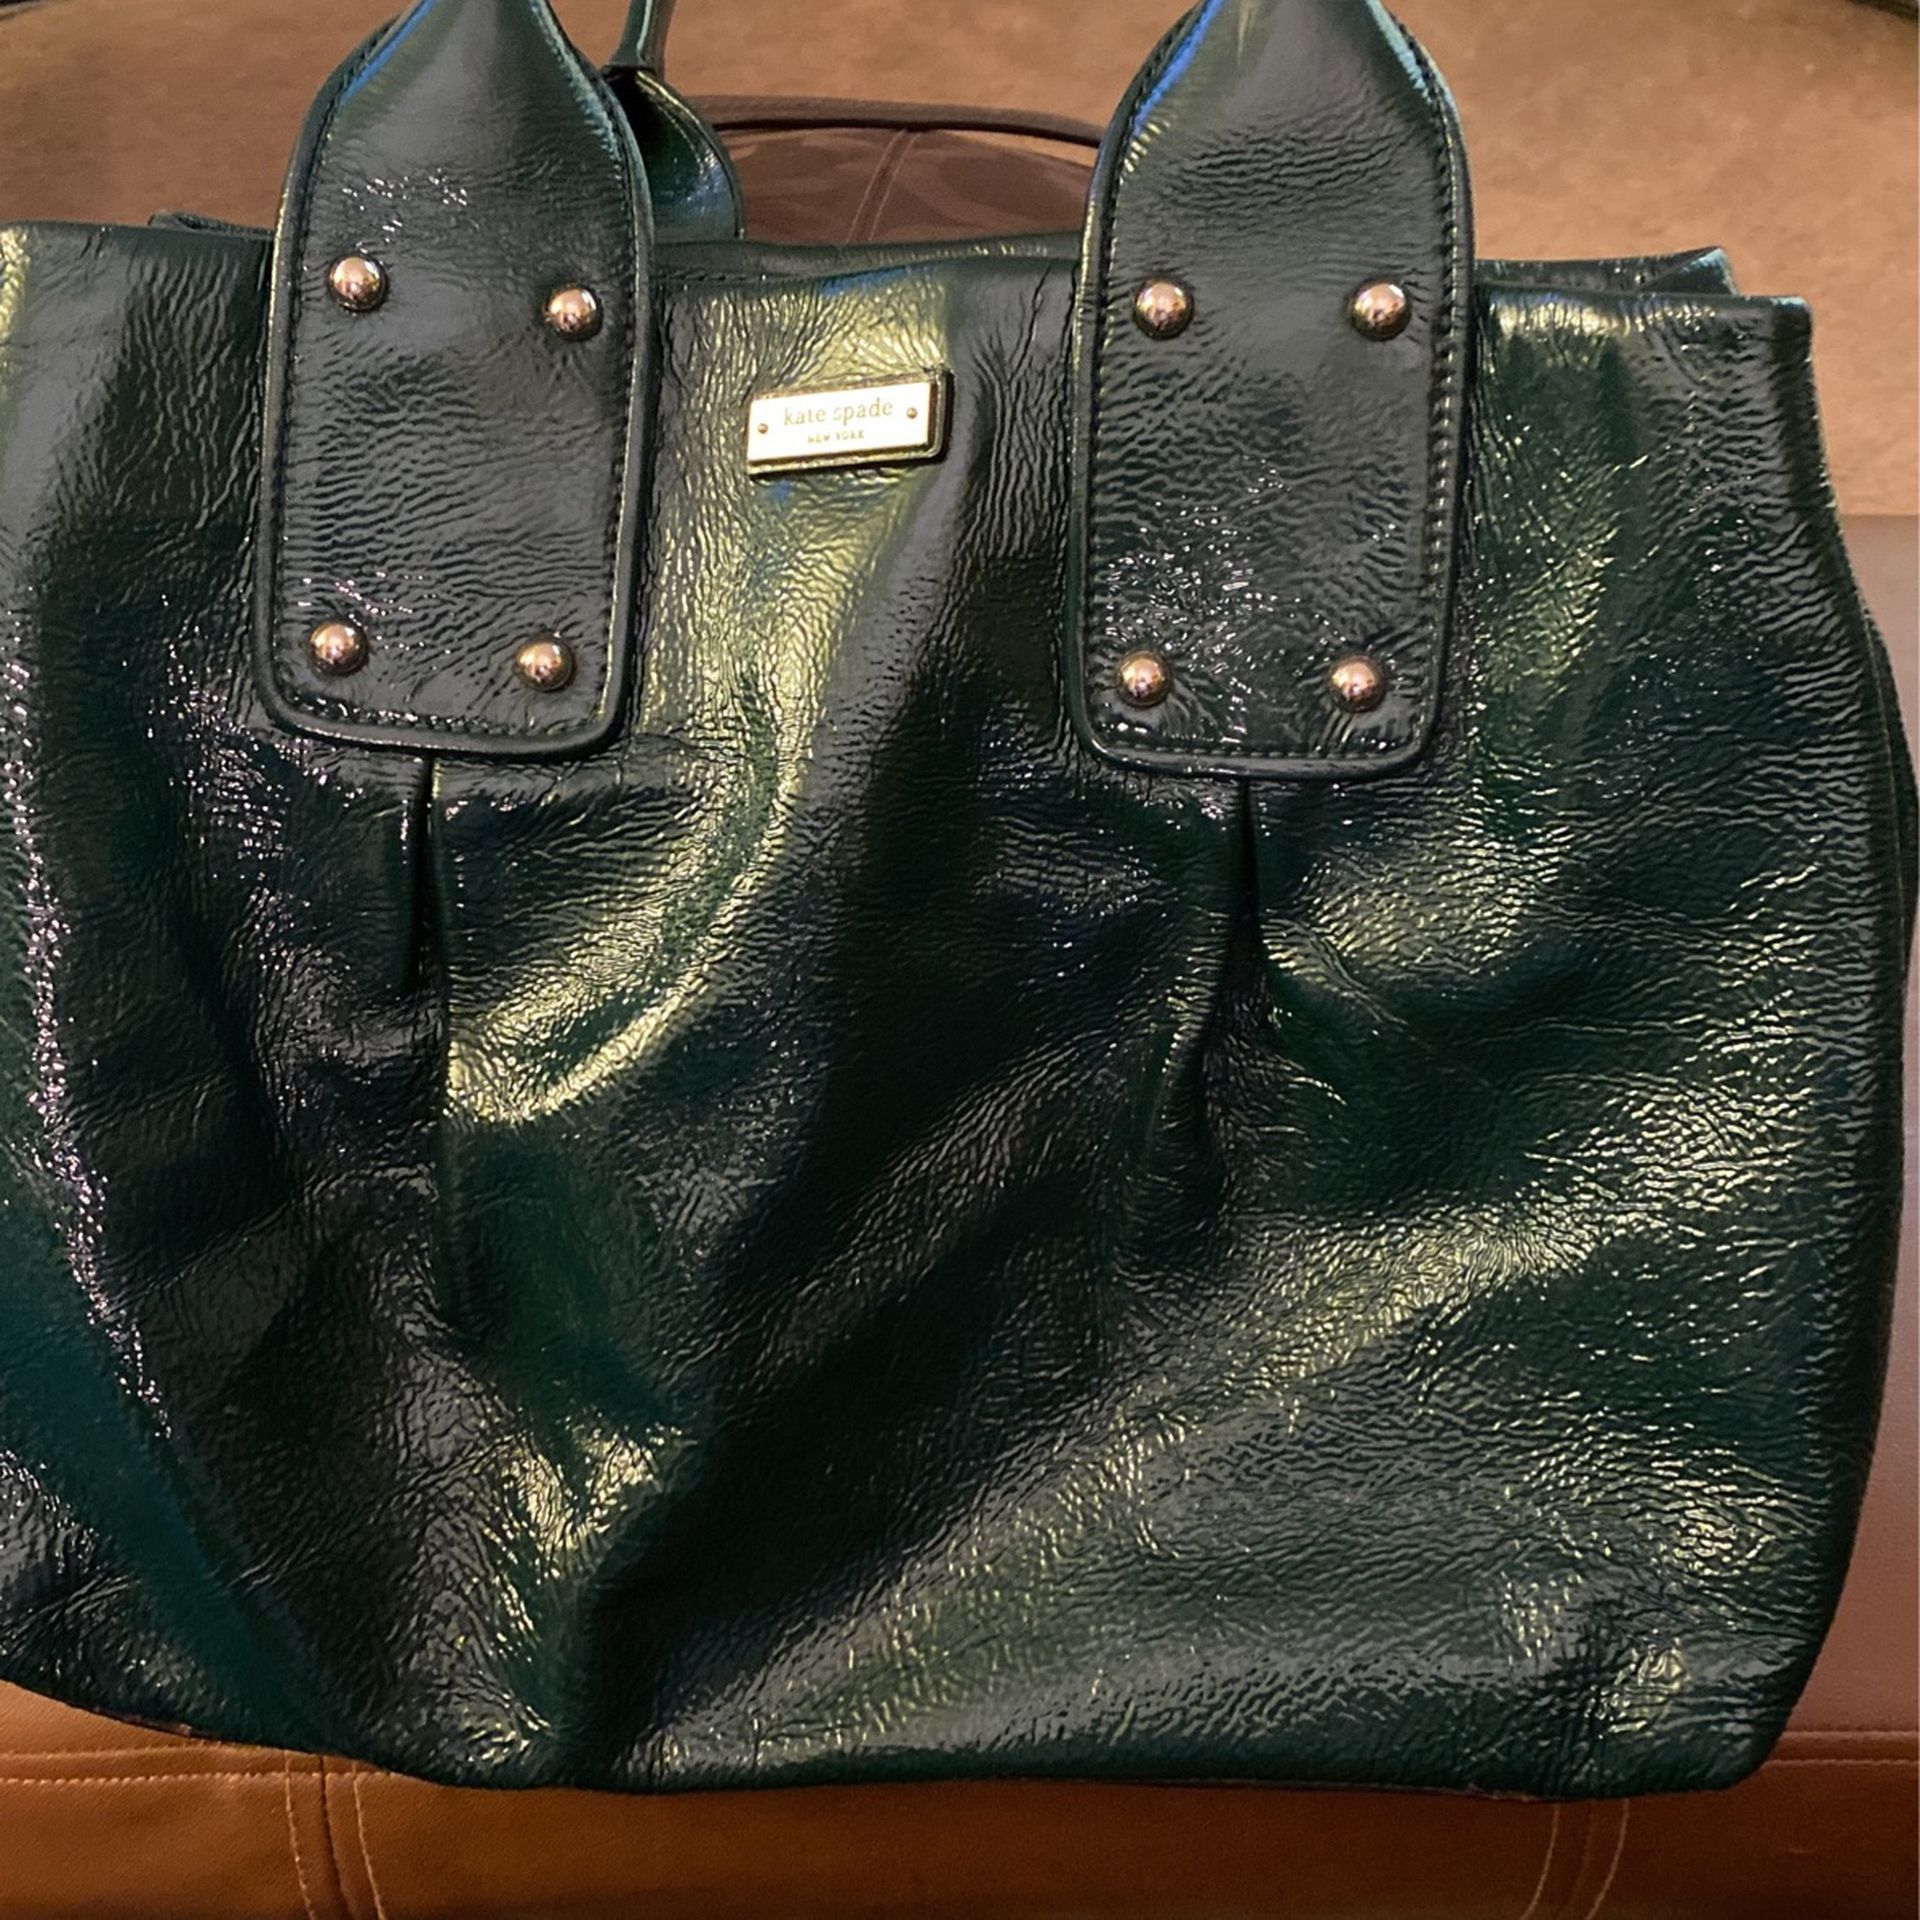 Very Nice Large Kate Spade Purse Clean Inside And Out